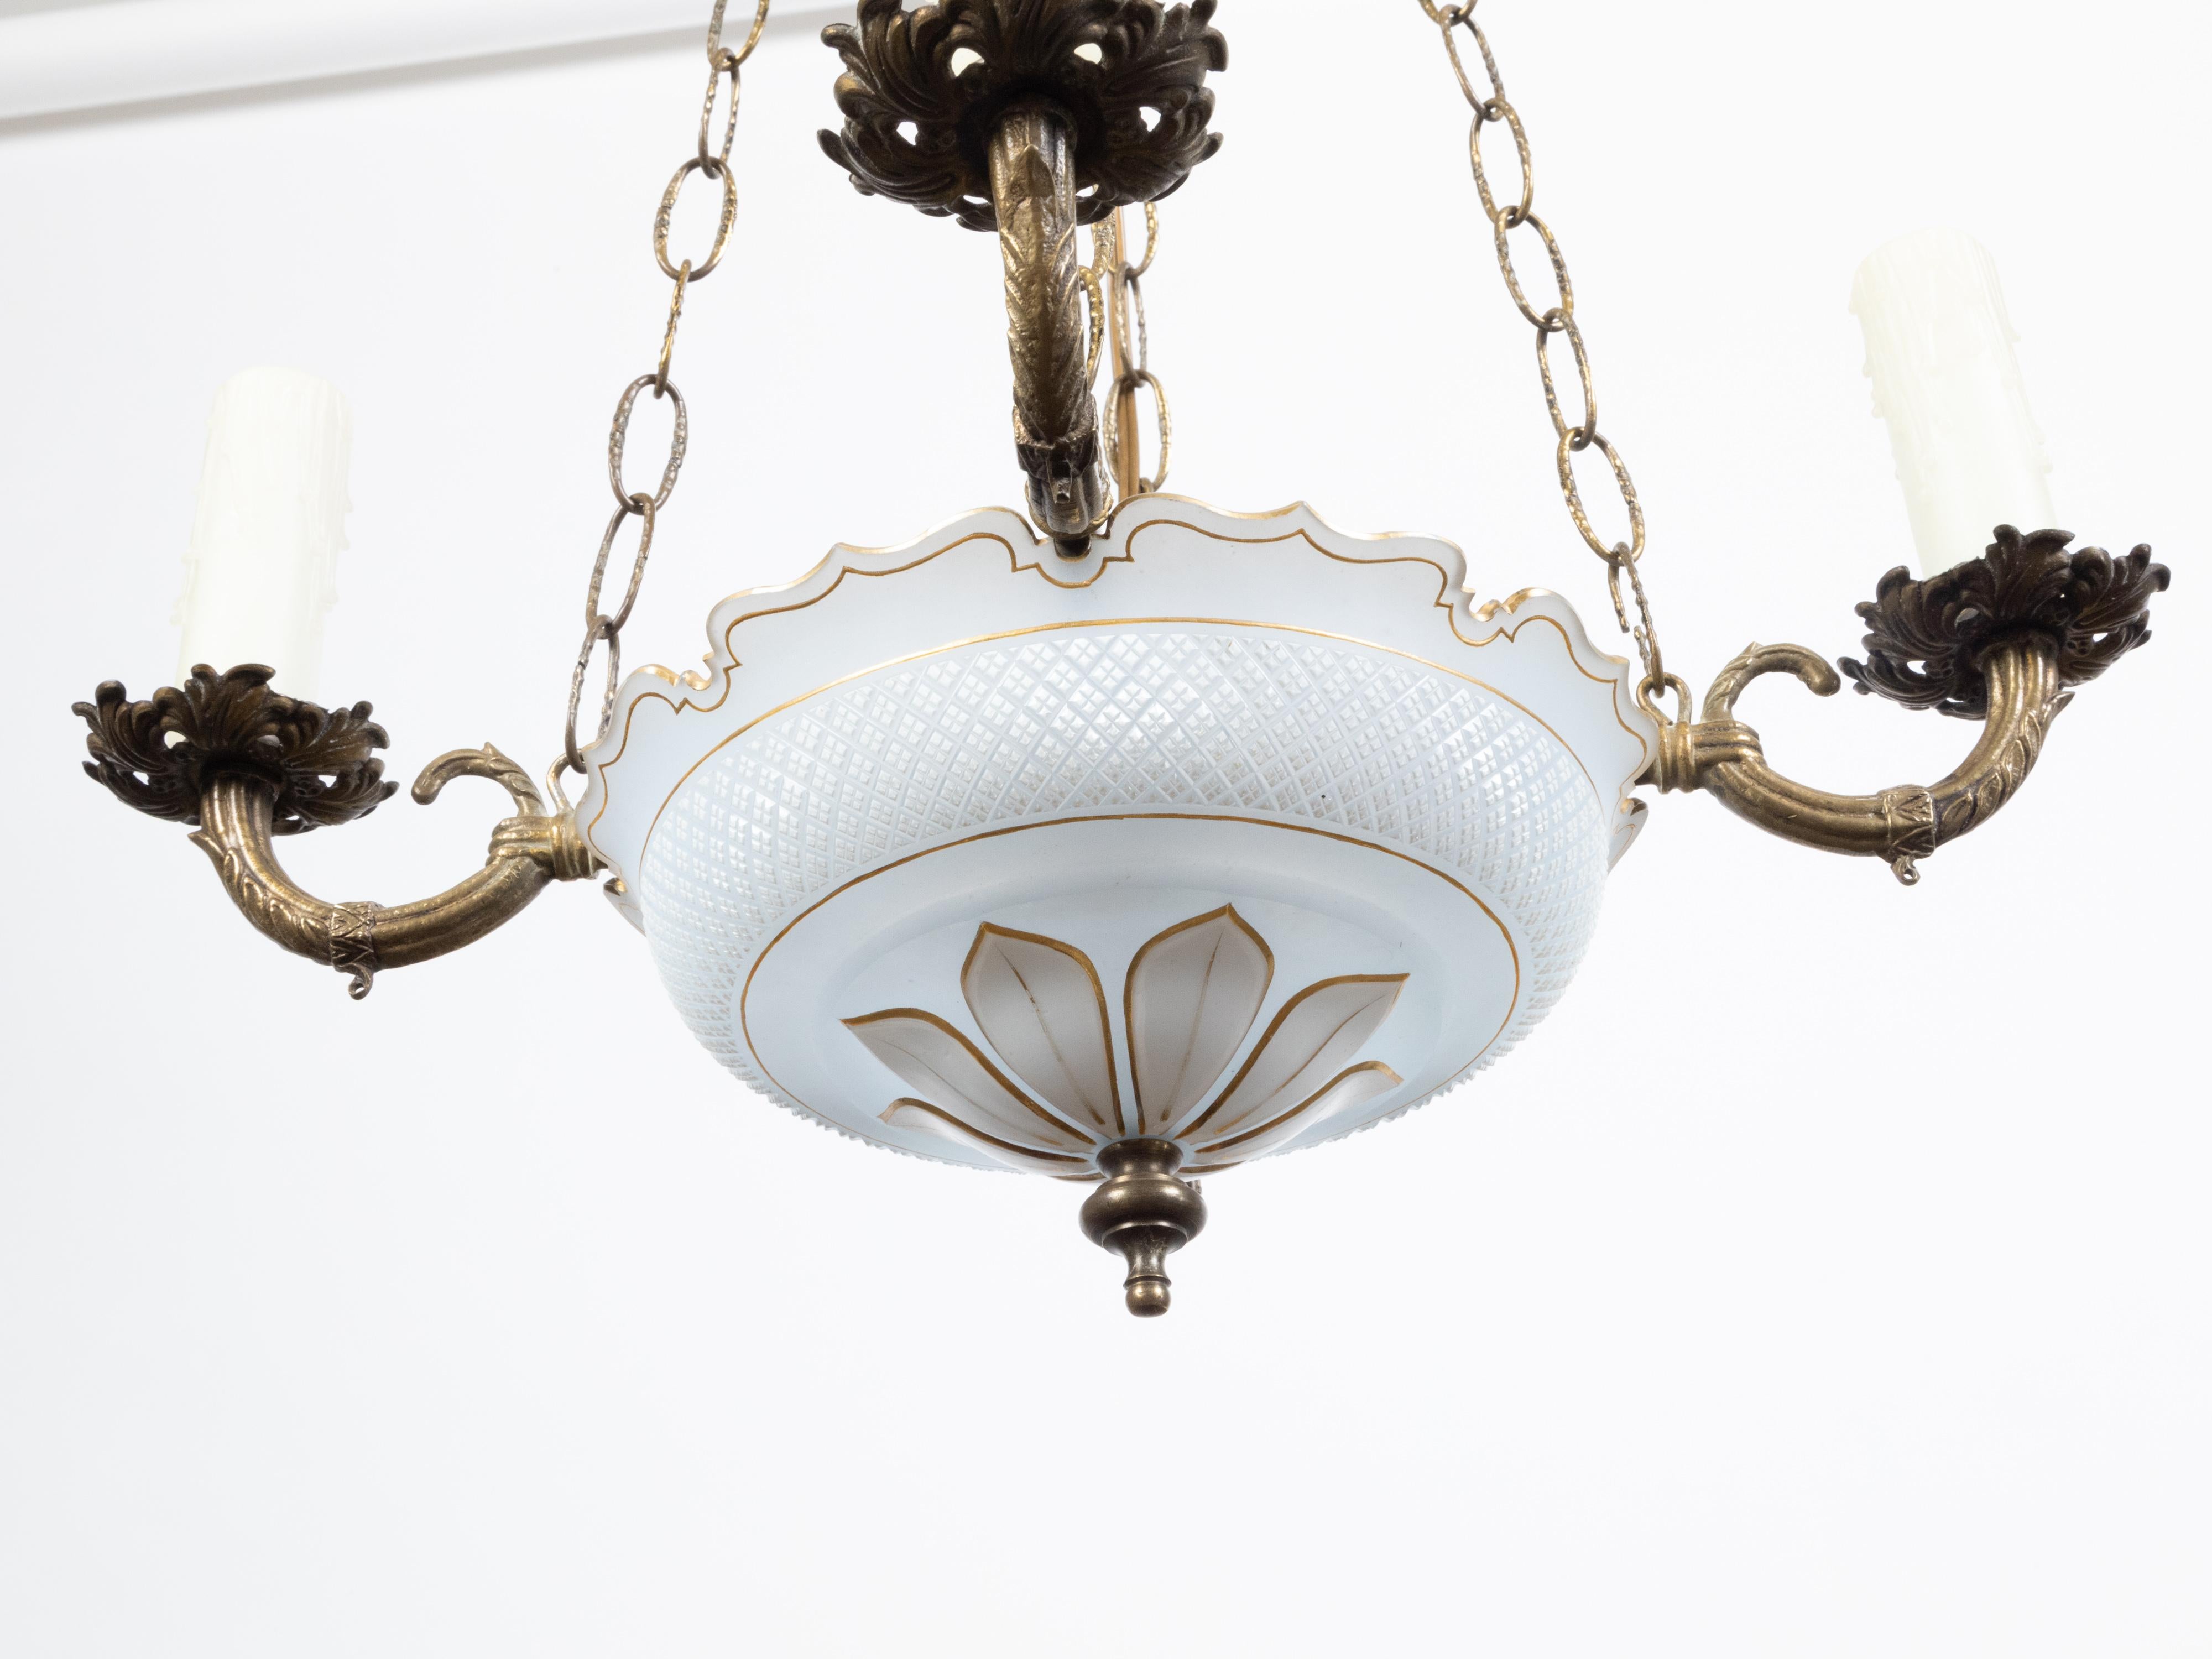 French 1900s Opaline Four-Light Chandelier with Leaf Motifs and Profiled Links For Sale 1